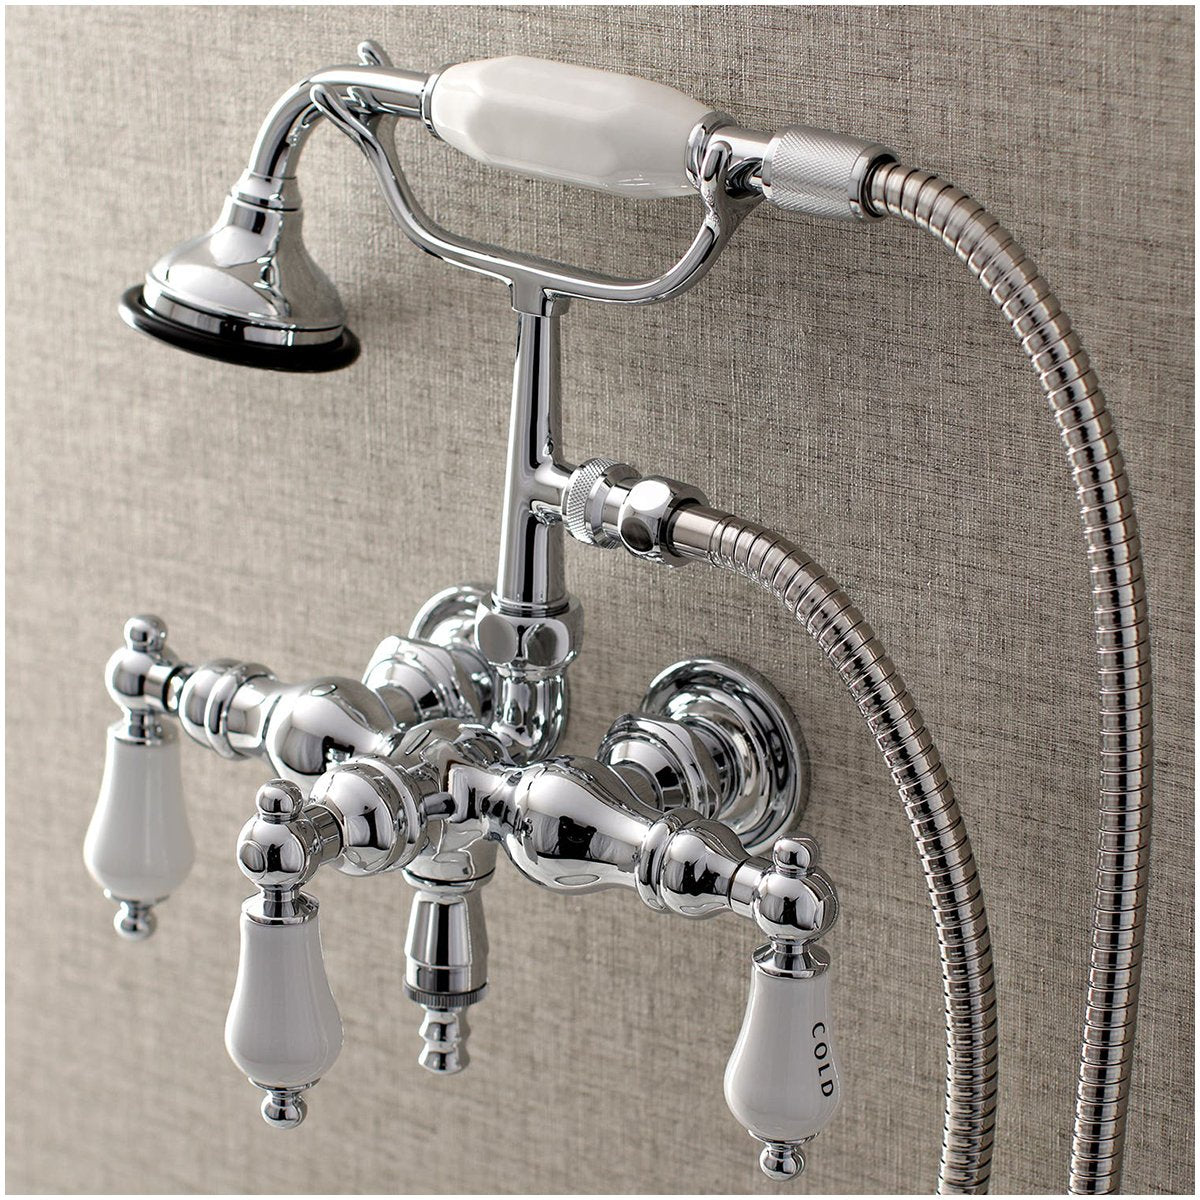 Aqua Vintage AE21TX-P 3-3/8-Inch Wall Mount Tub Faucet with Hand Shower